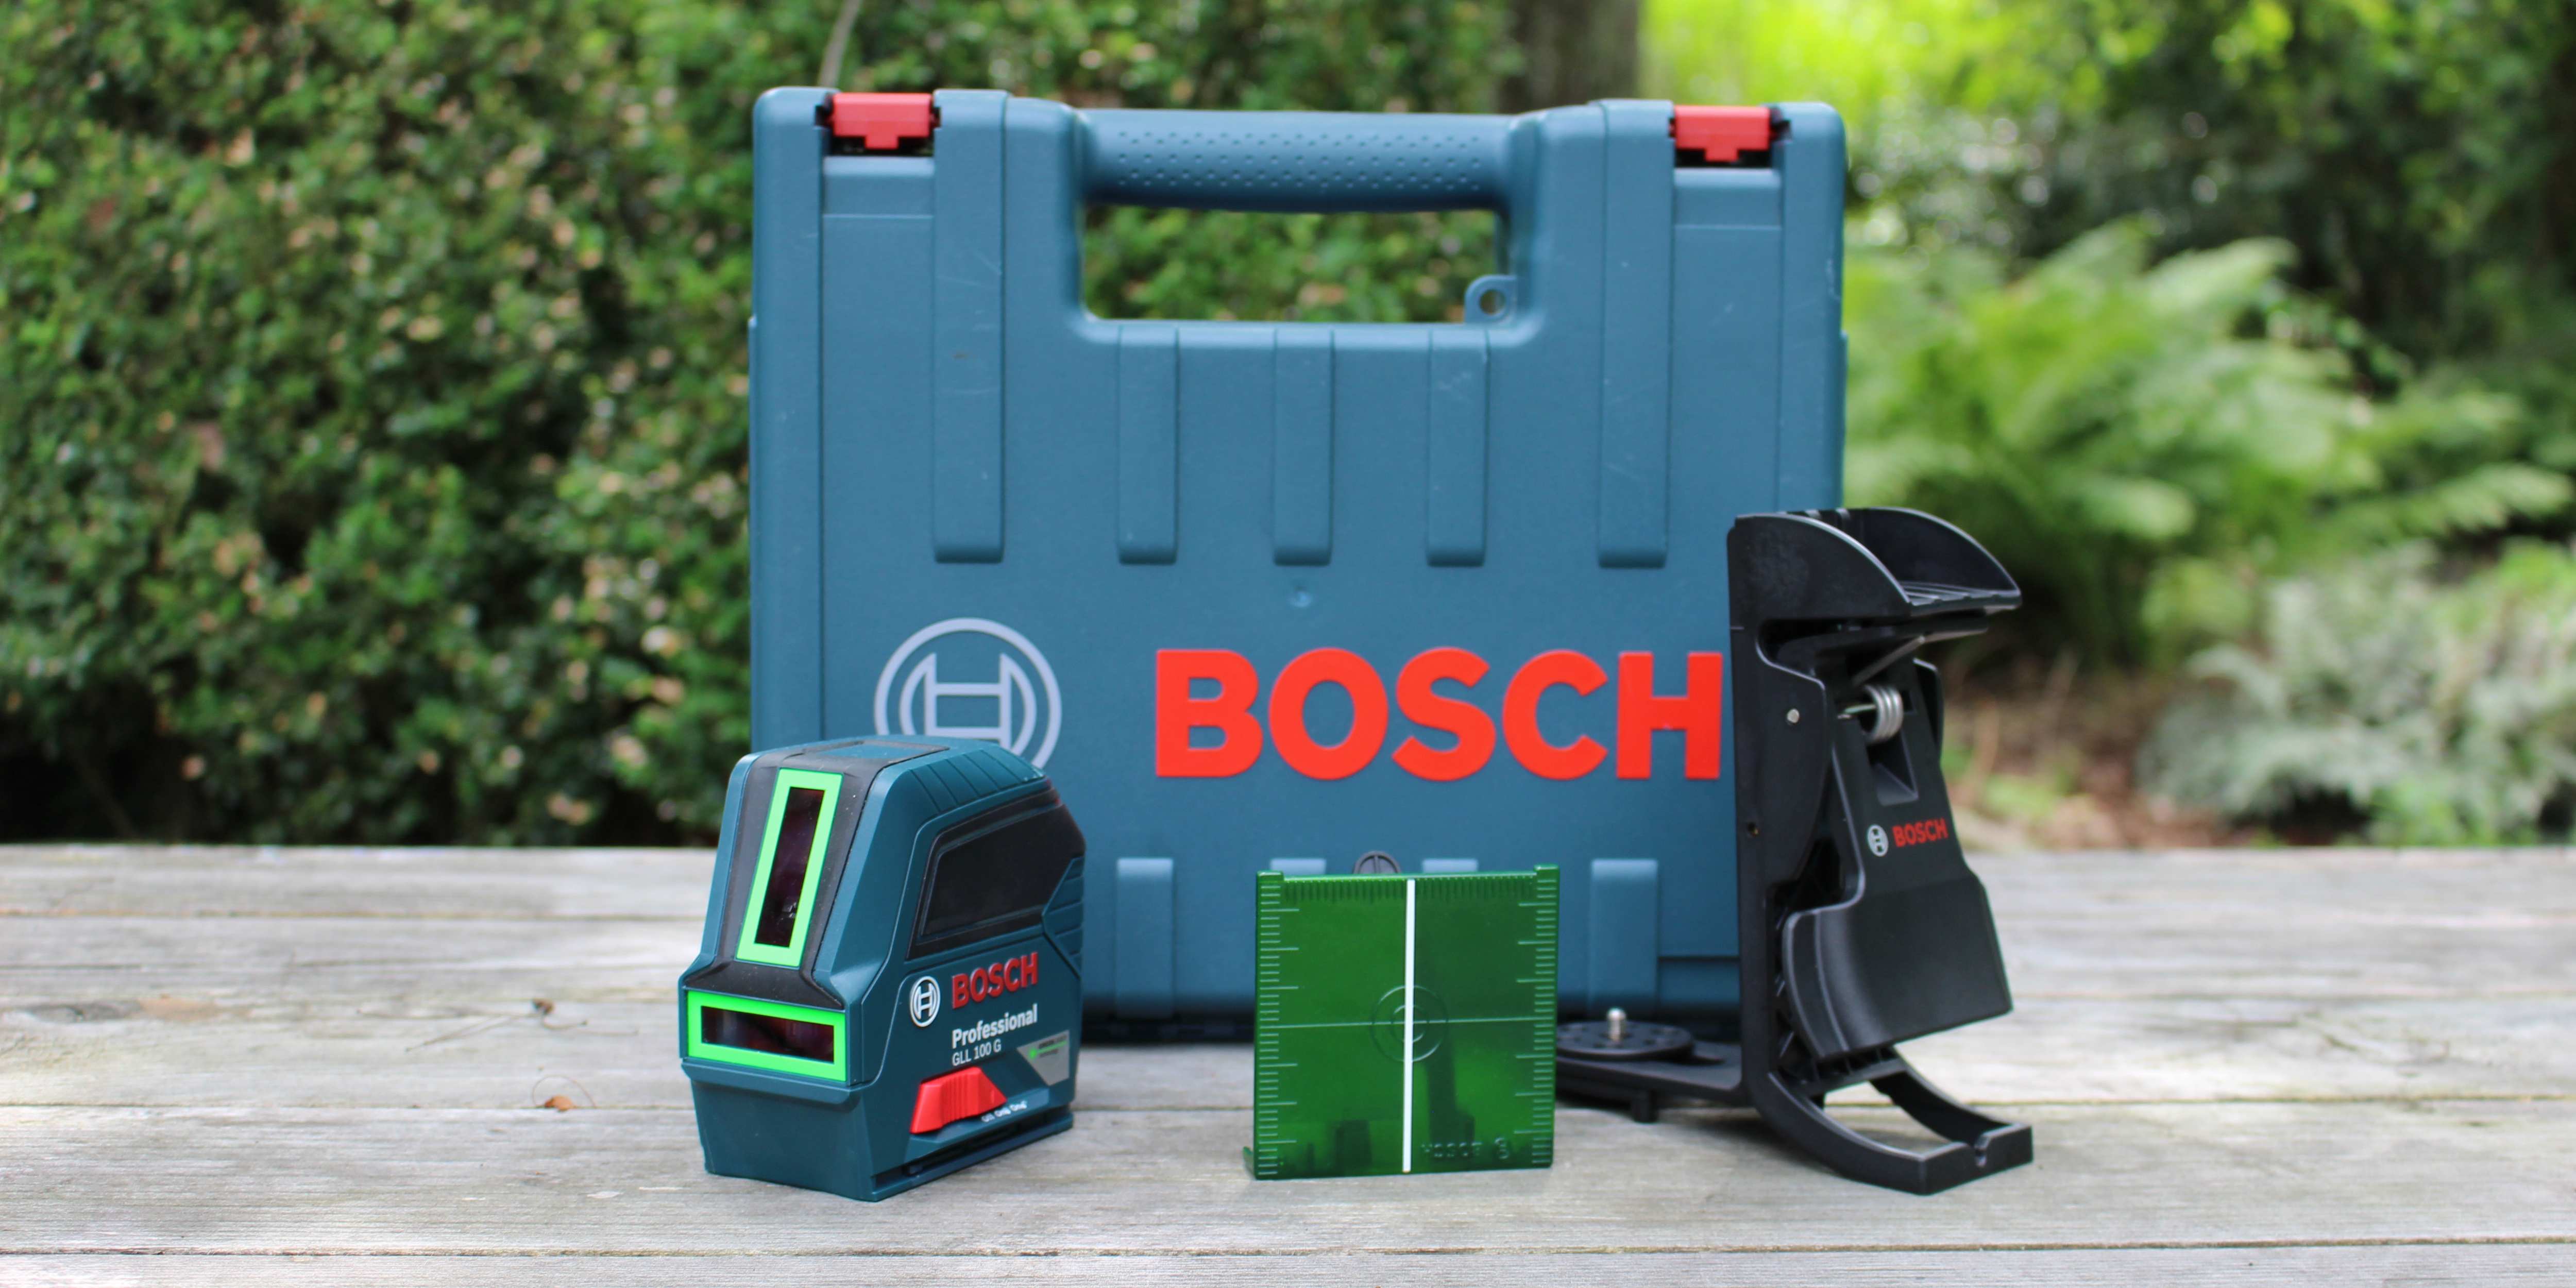 Review Bosch Green Beam Laser Level Makes Any Task Faster And